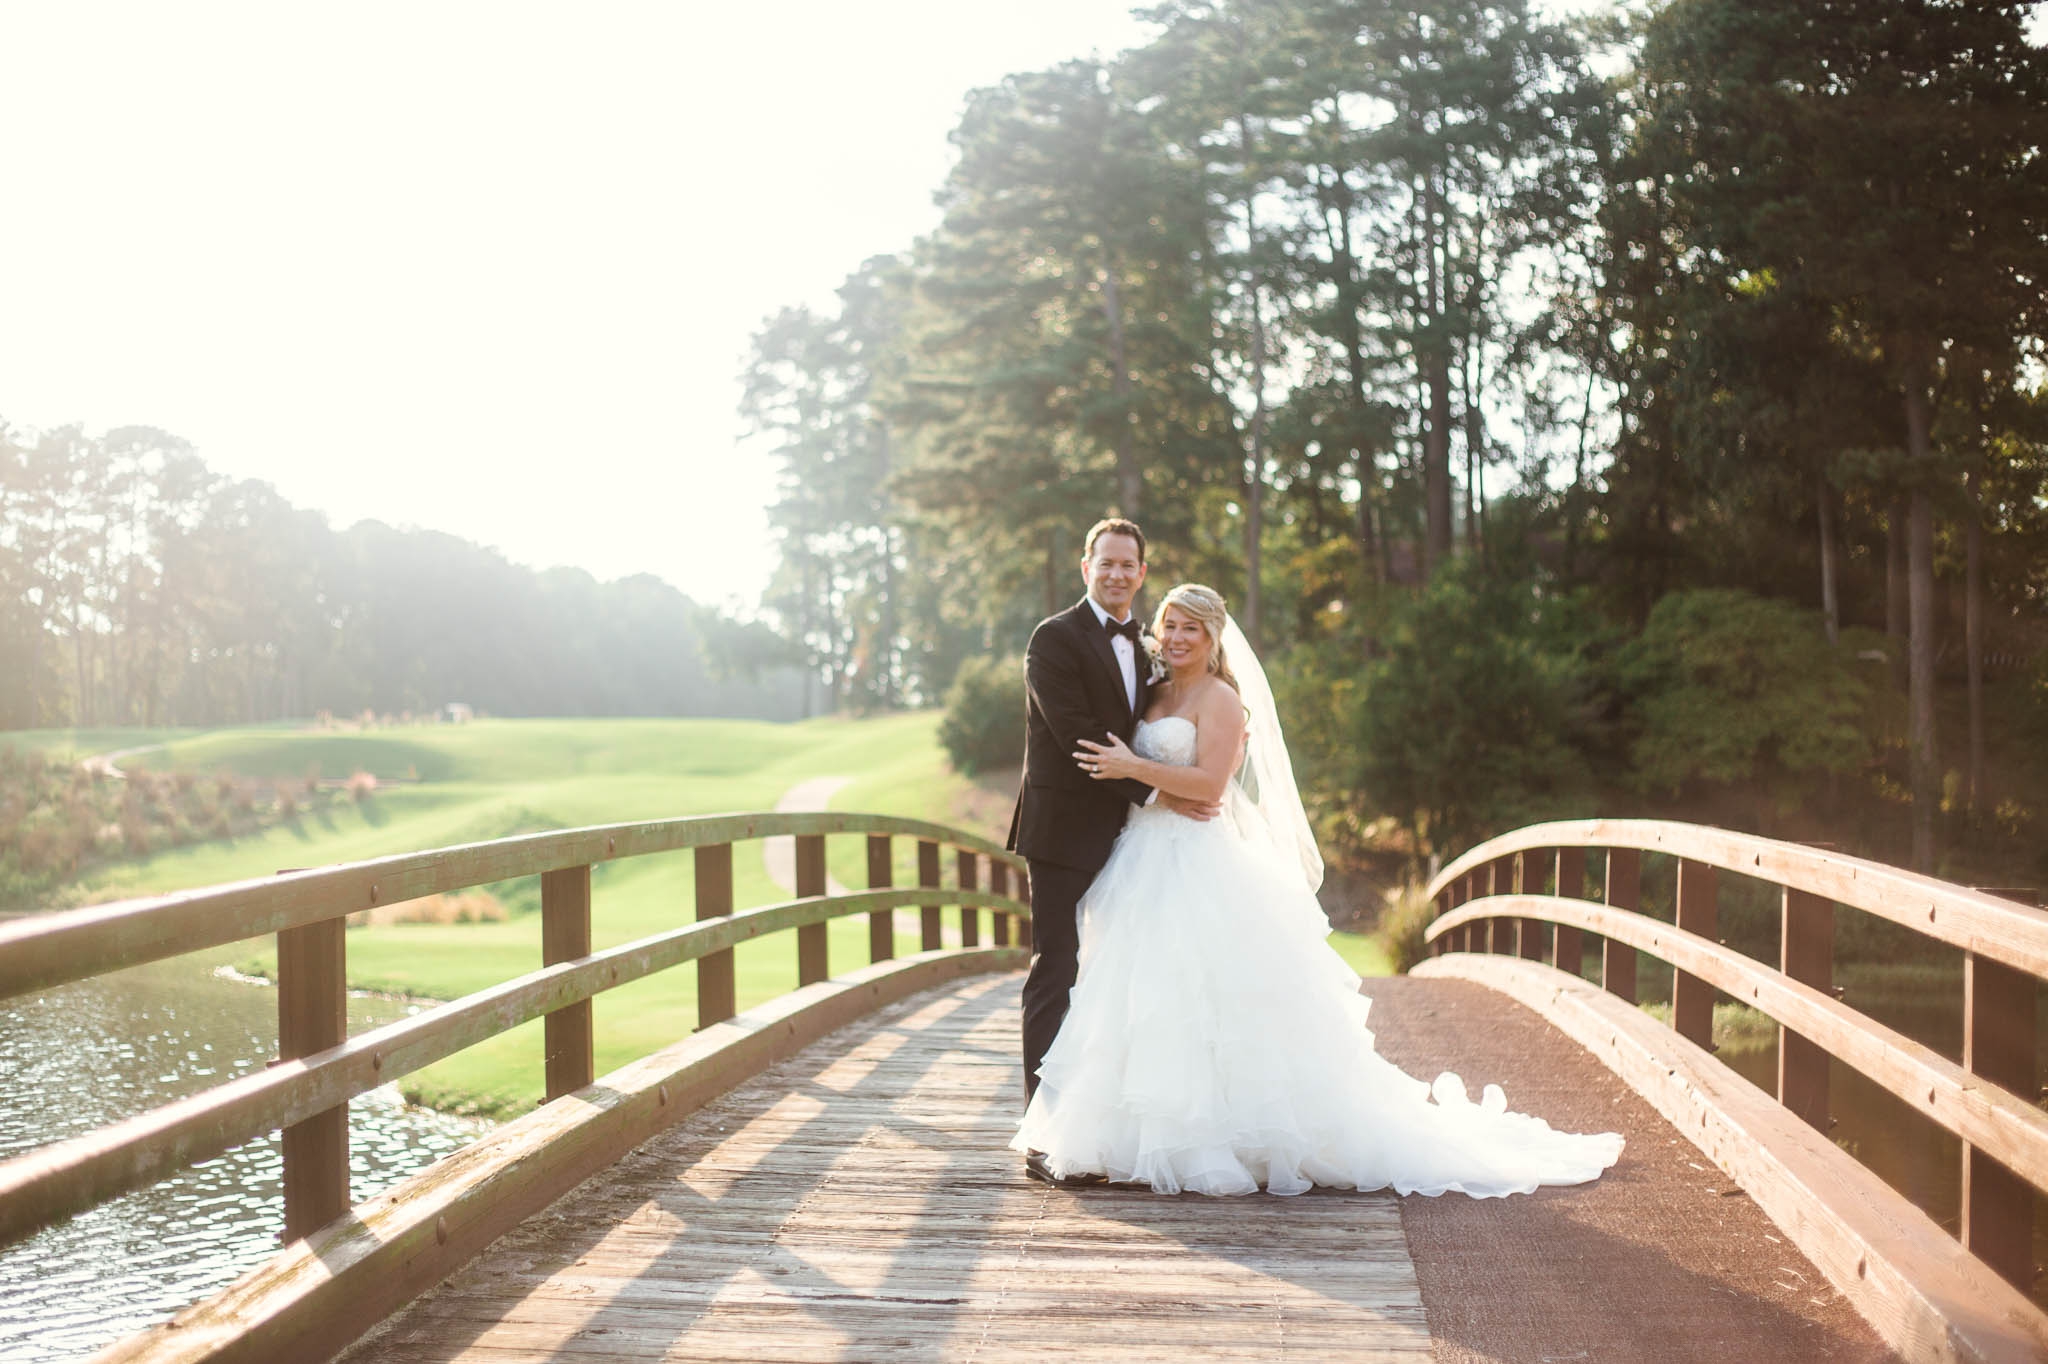 Bride and Groom Portraits - Dona + Doug - MacGregor Downs Country Club in Cary, NC - Raleigh Wedding Photographer